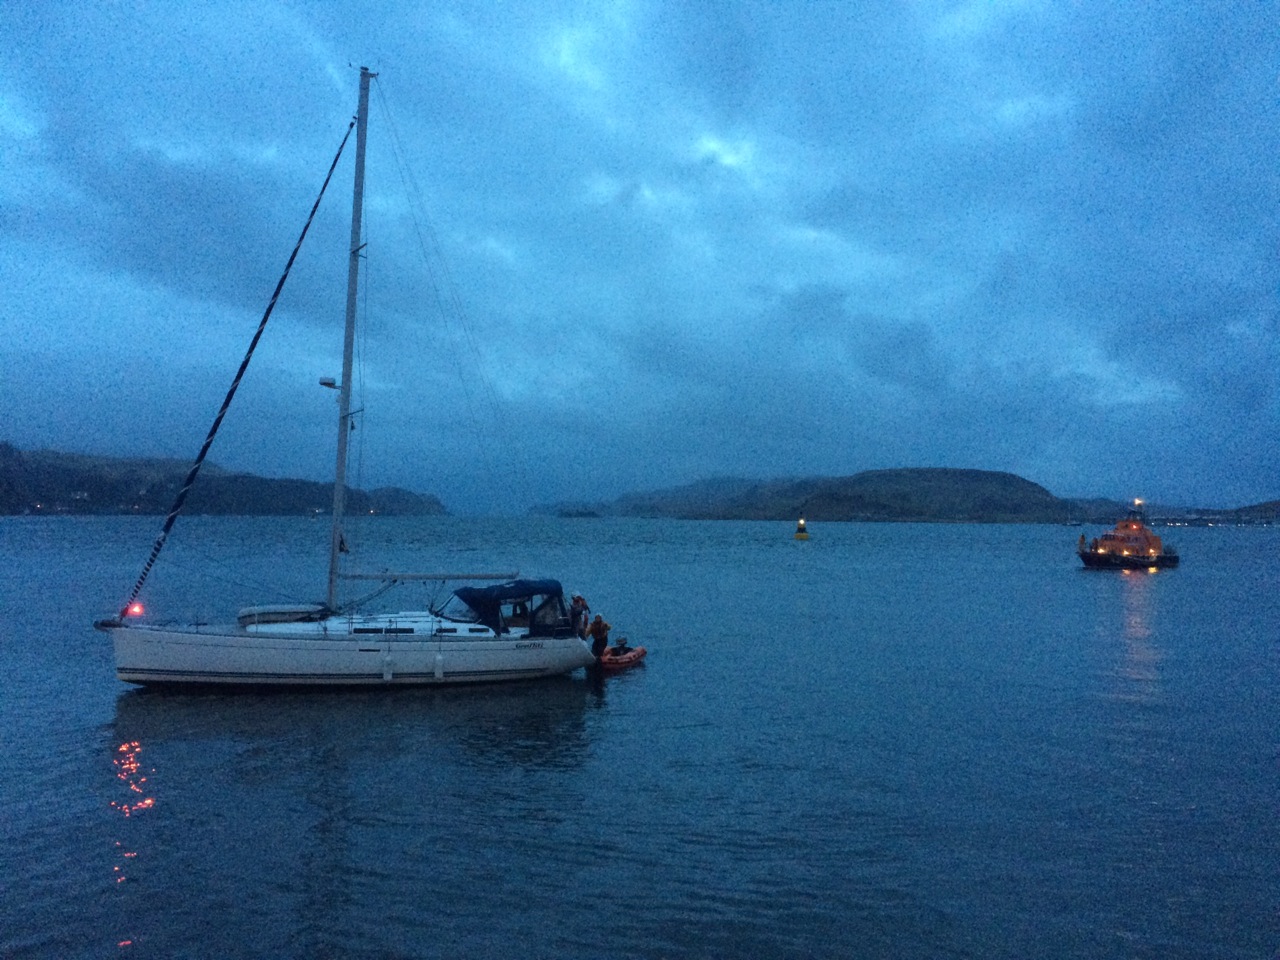 The 40ft boat experienced engine problems entering Oban Bay.